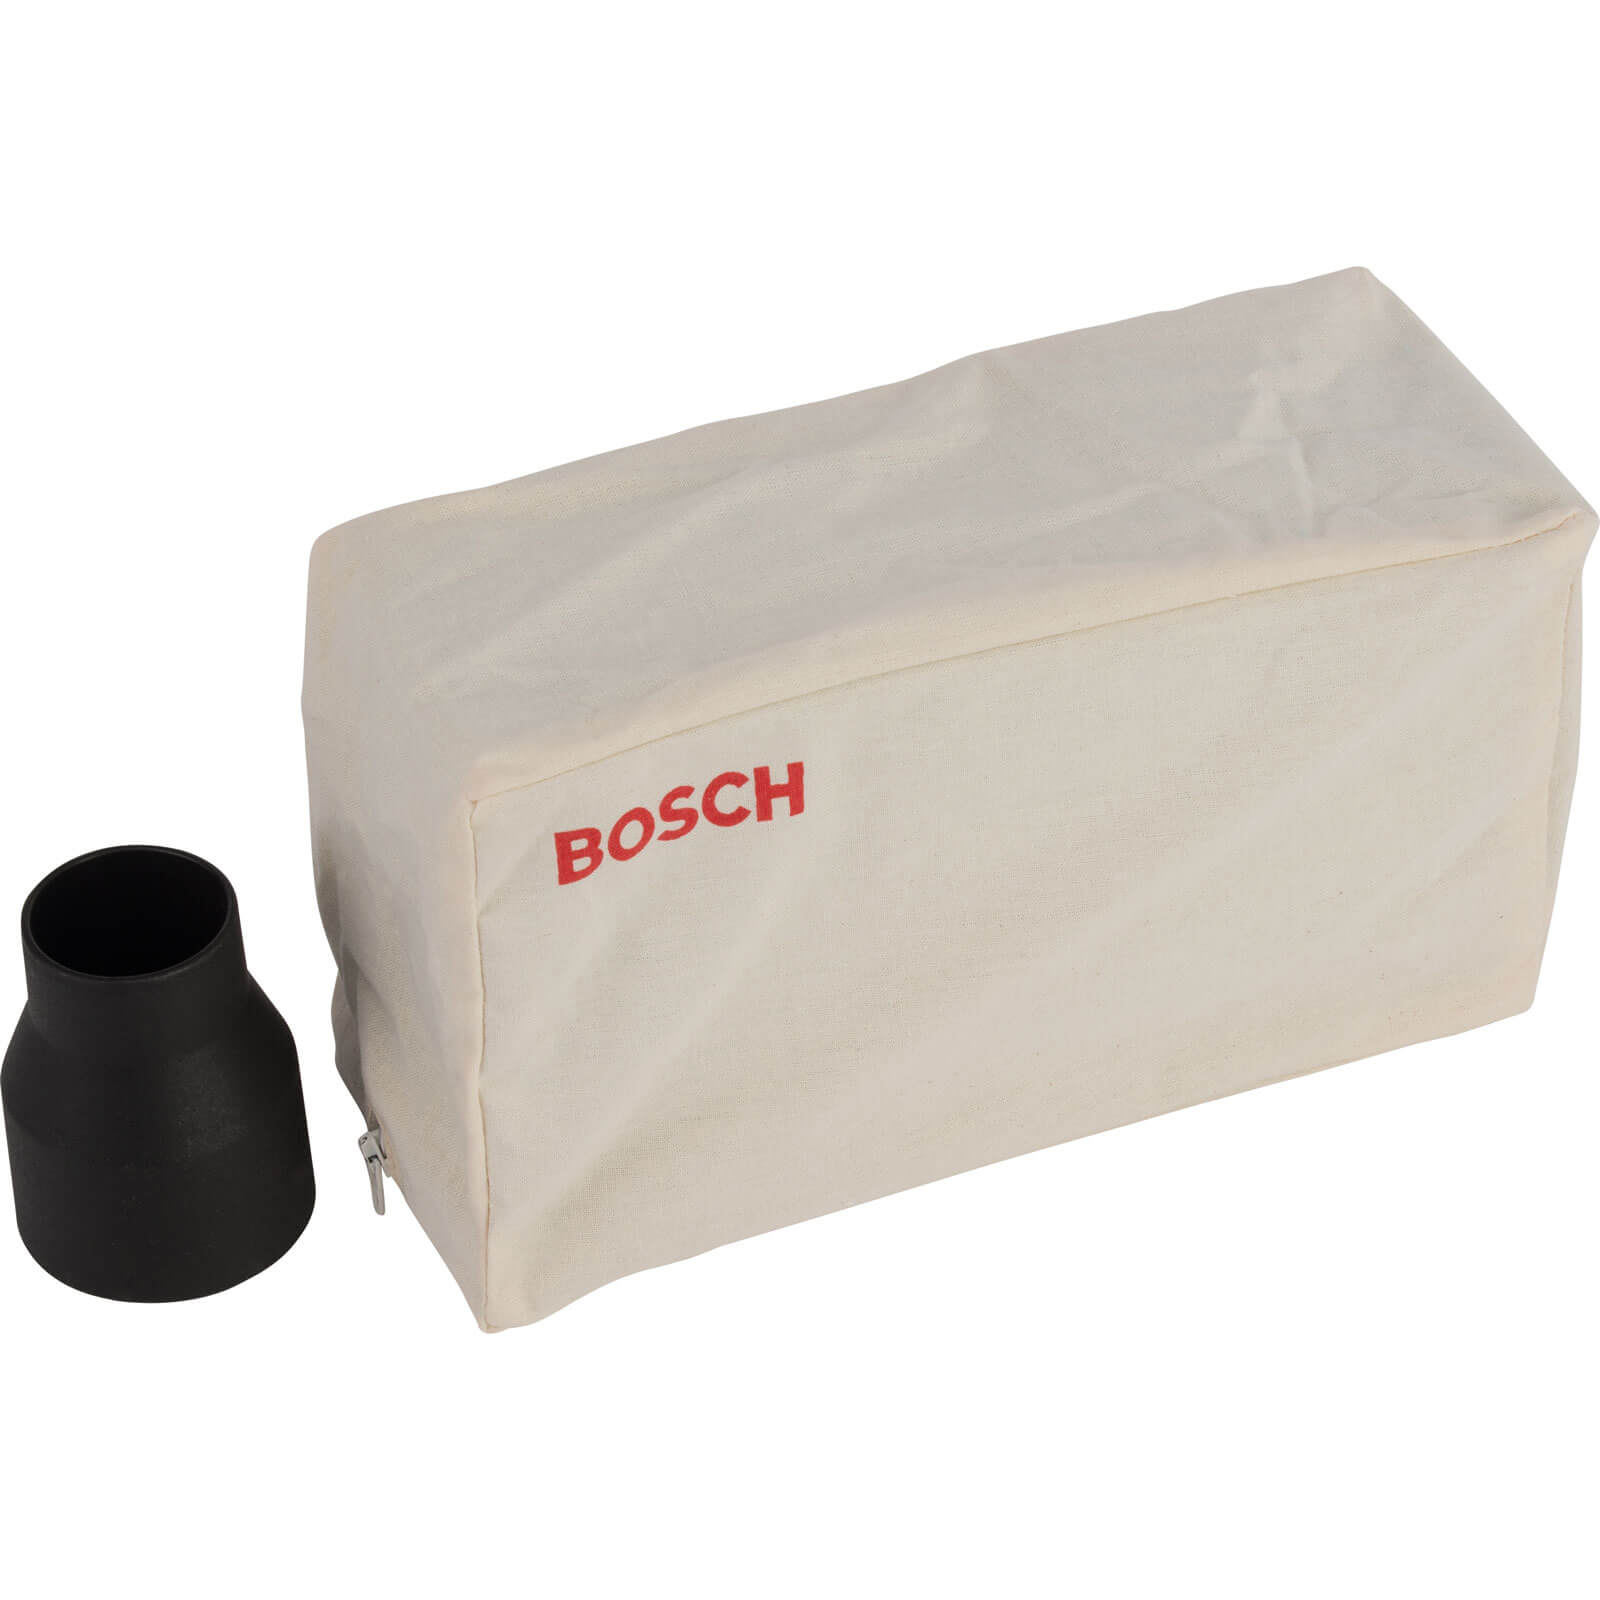 Image of Bosch Power Tool Dust Bag